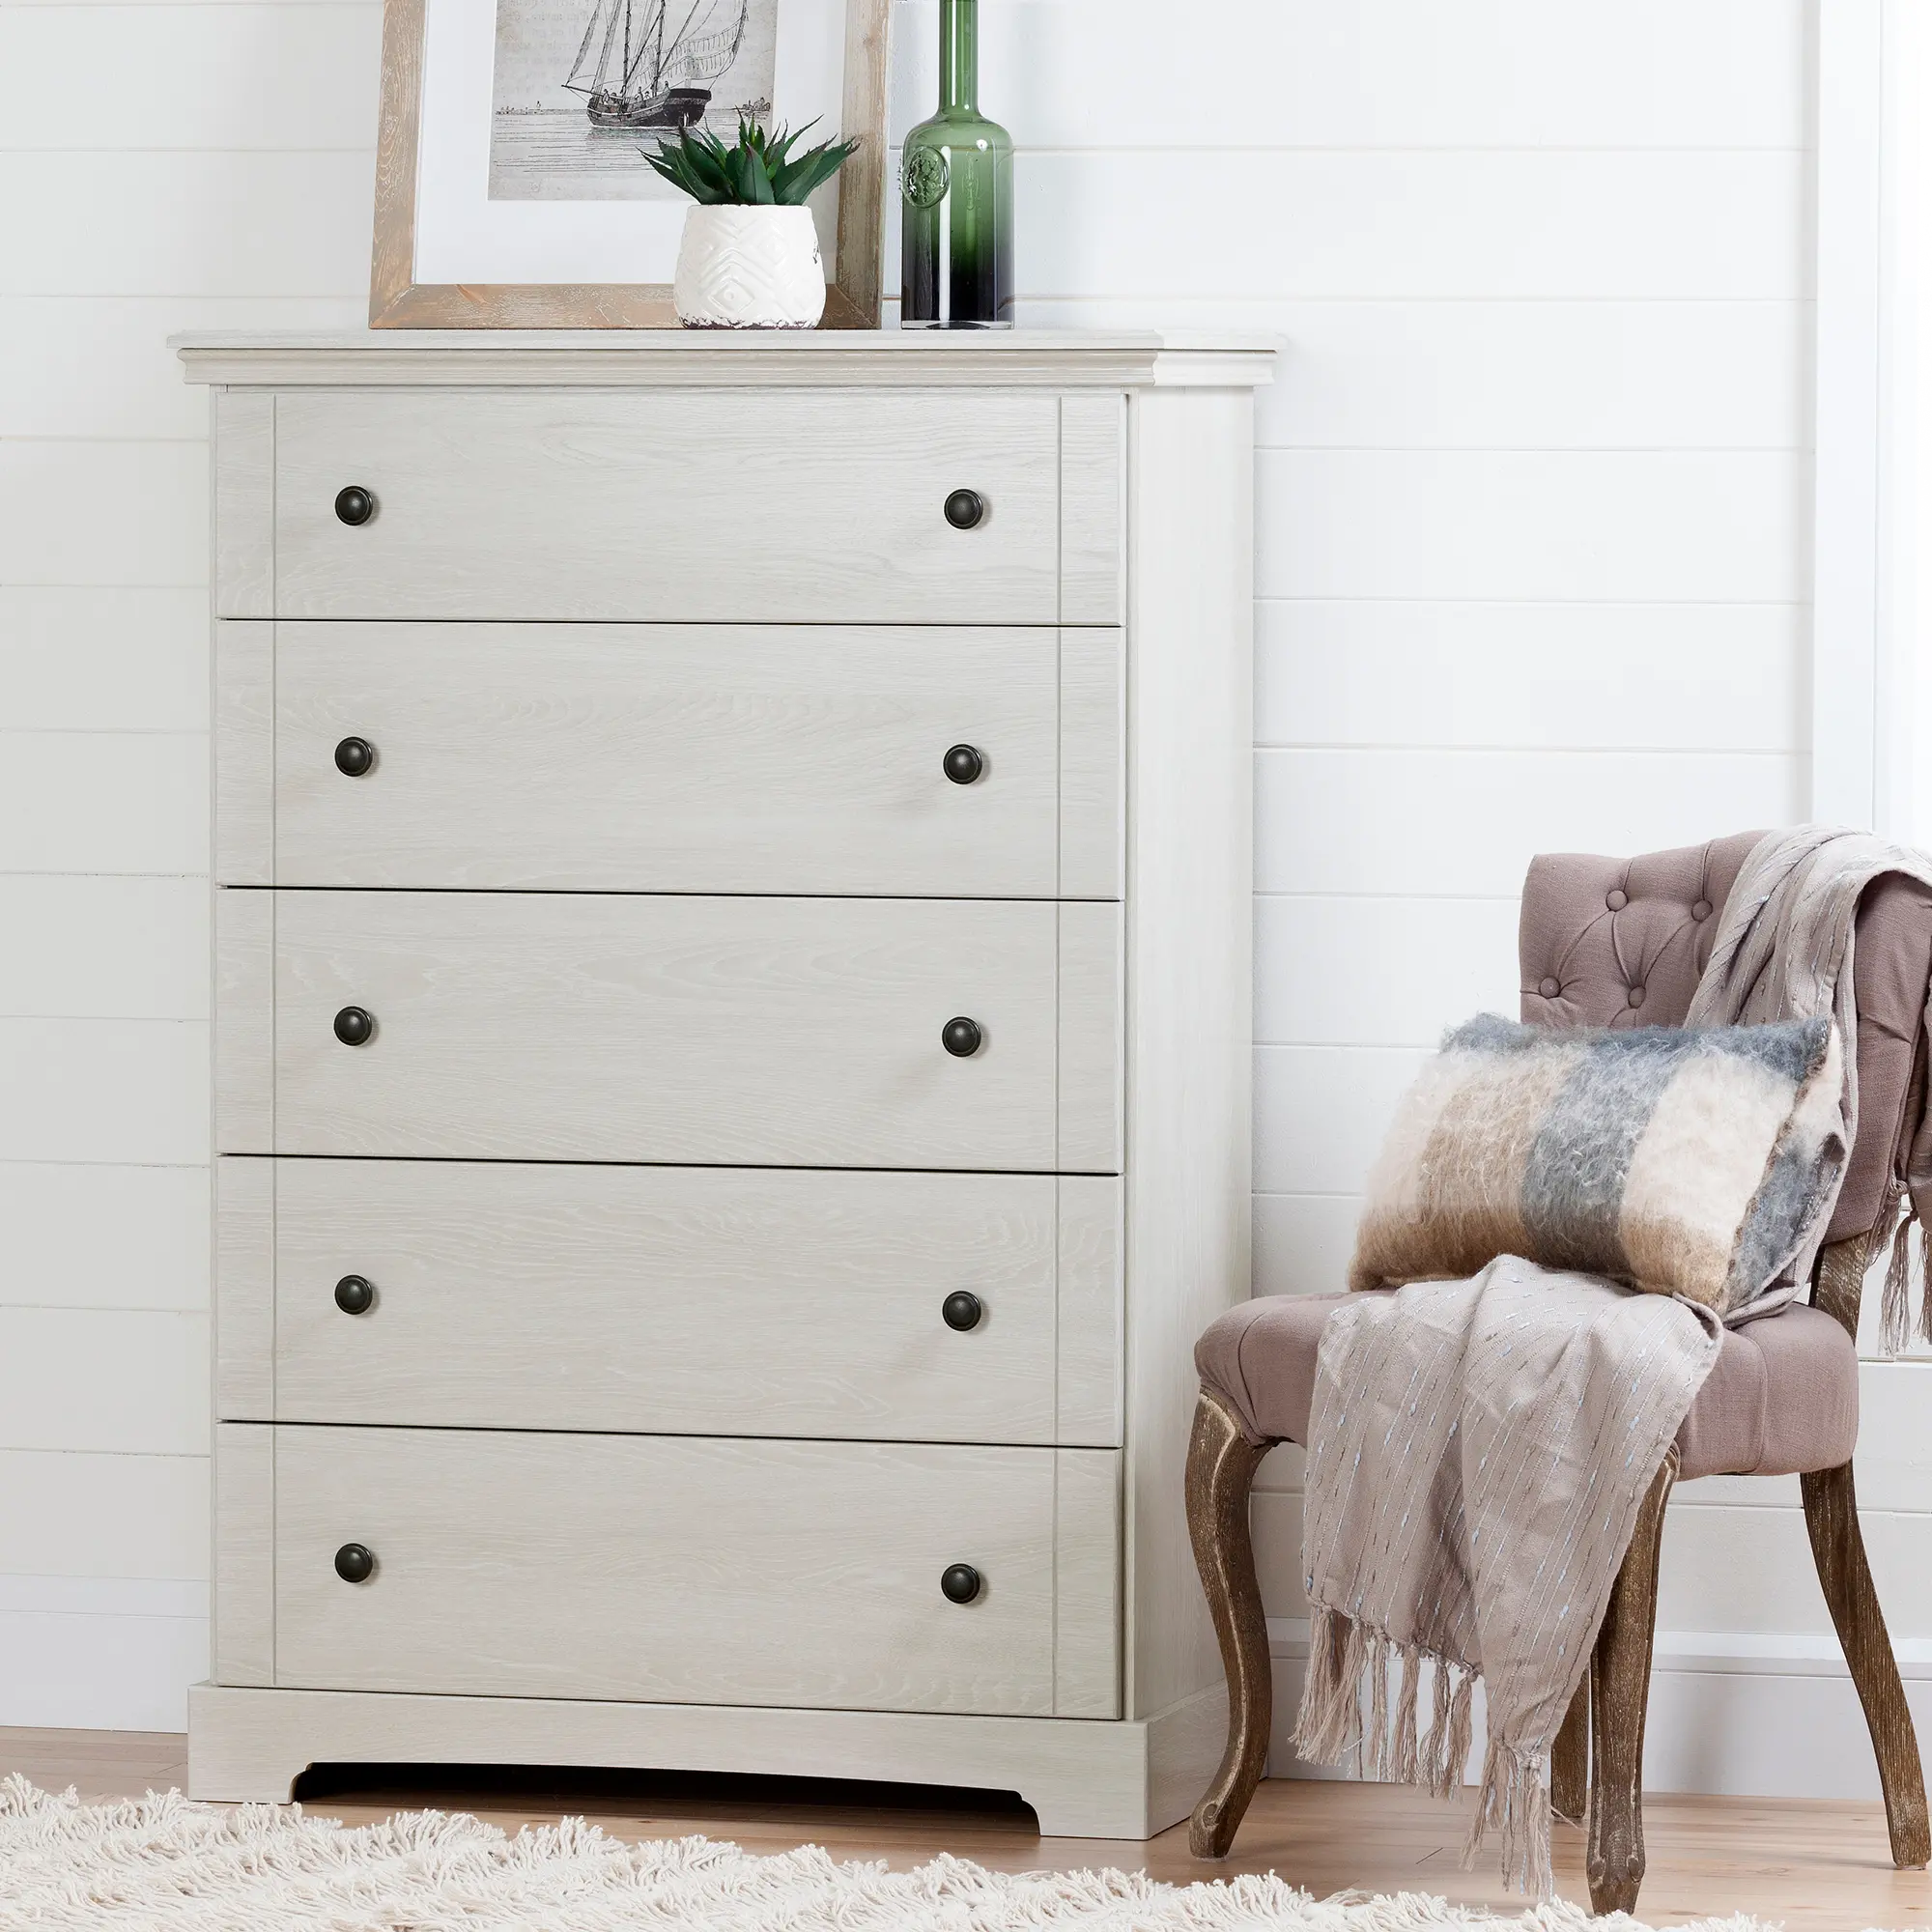 Lilak Cottage Winter Oak White Chest of Drawers - South Shore